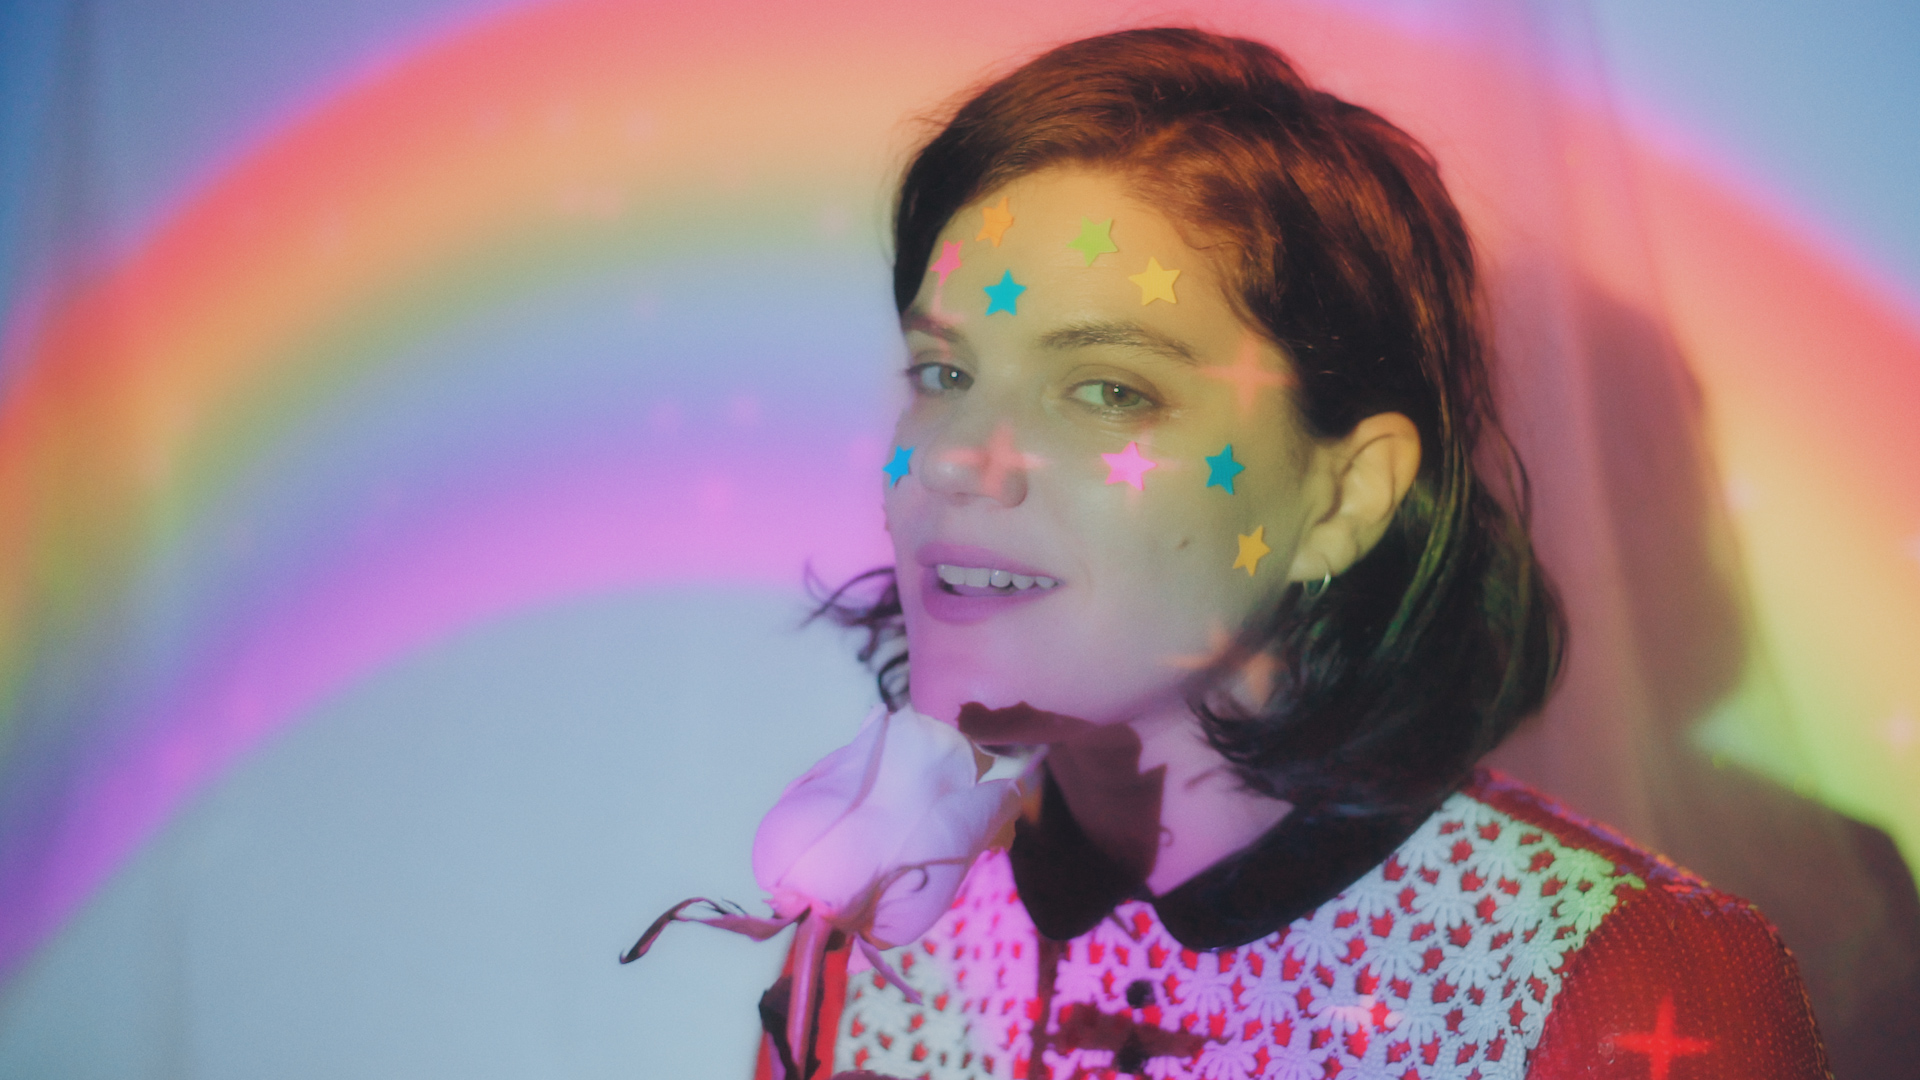 Soko Releases “Oh, To Be a Rainbow” - V Magazine